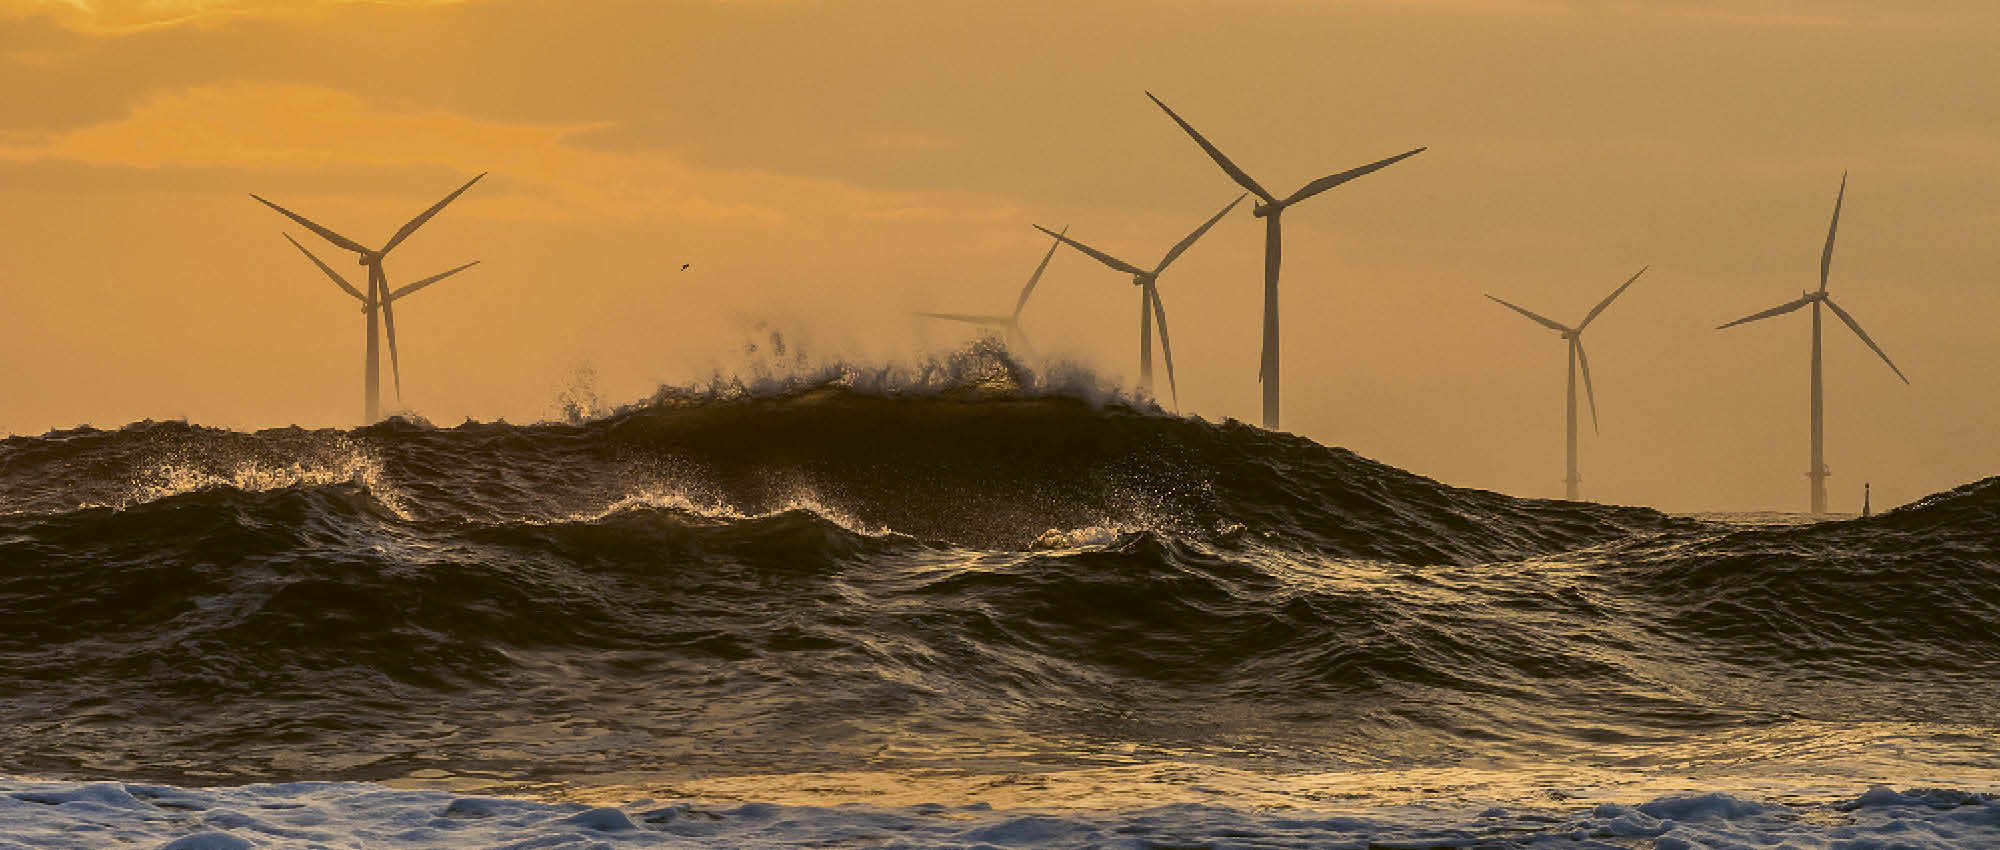 Sunset by the sea with windmills behind the waves.